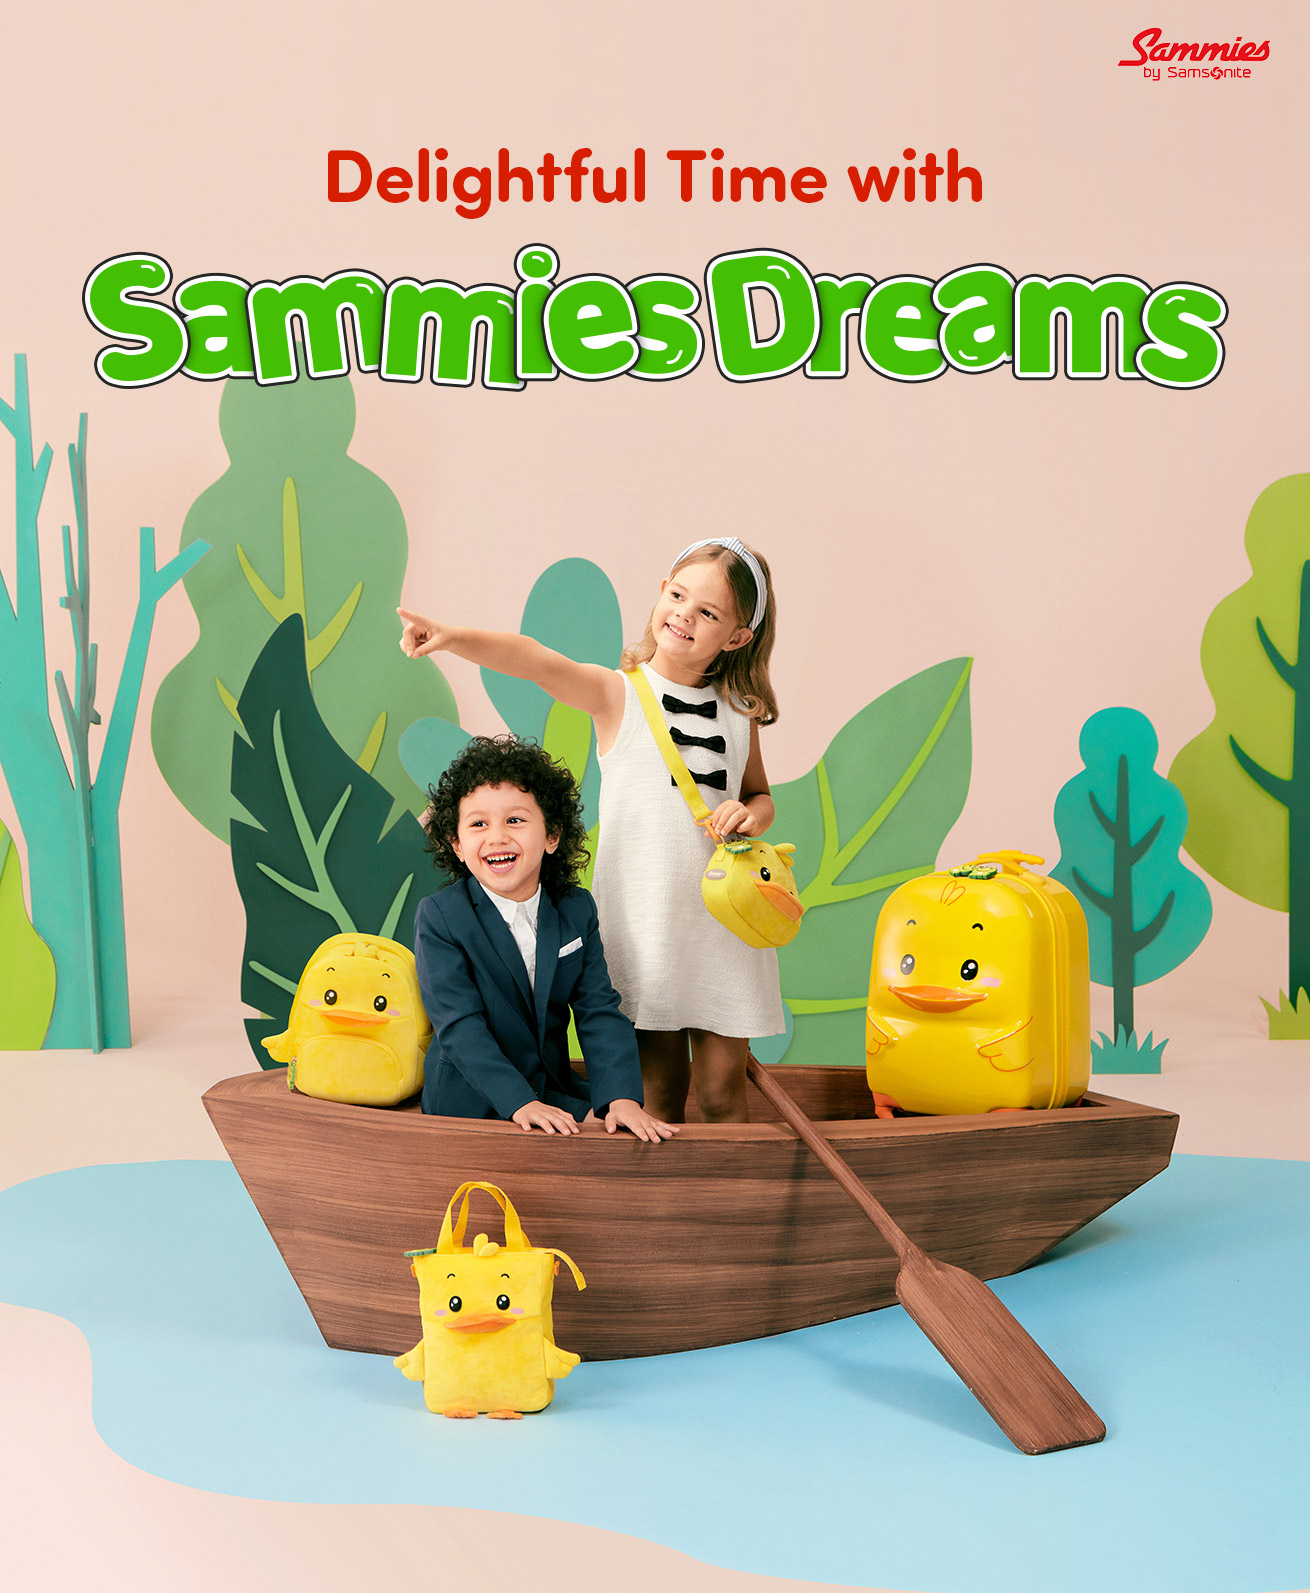 Delightful Time with Sammies Dreams